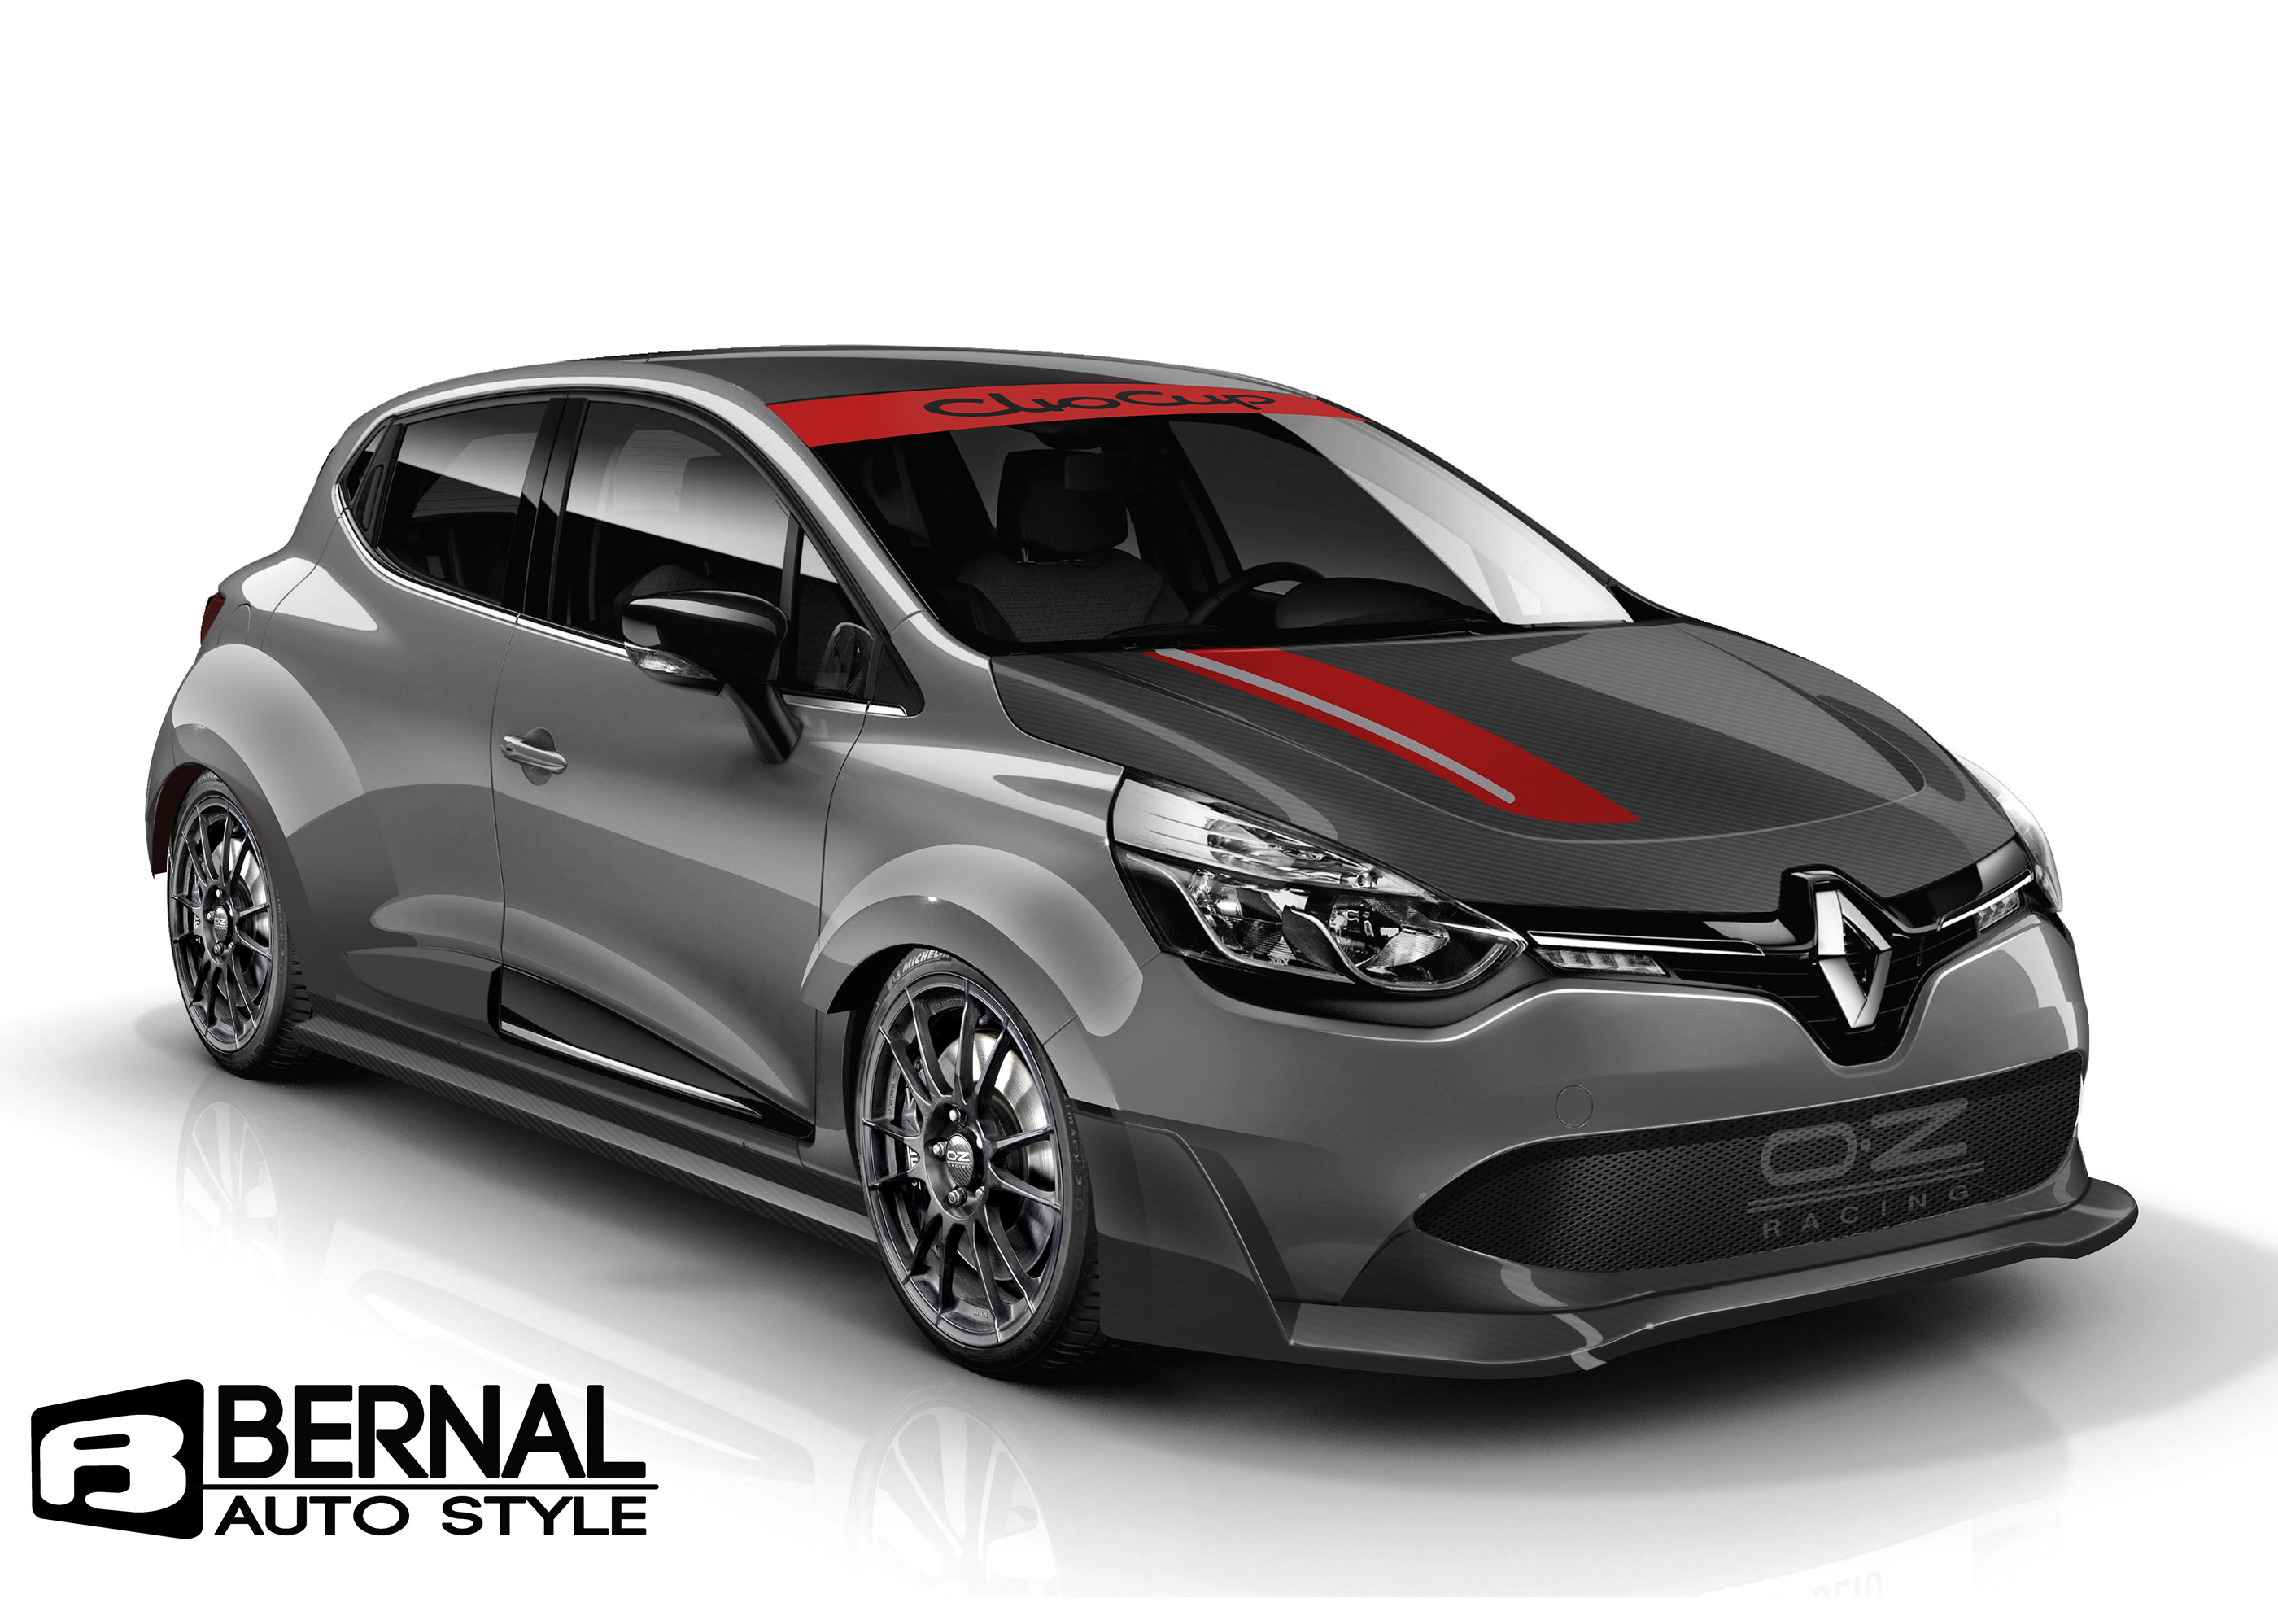 Renault Clio Cup Concept with wide body kit.